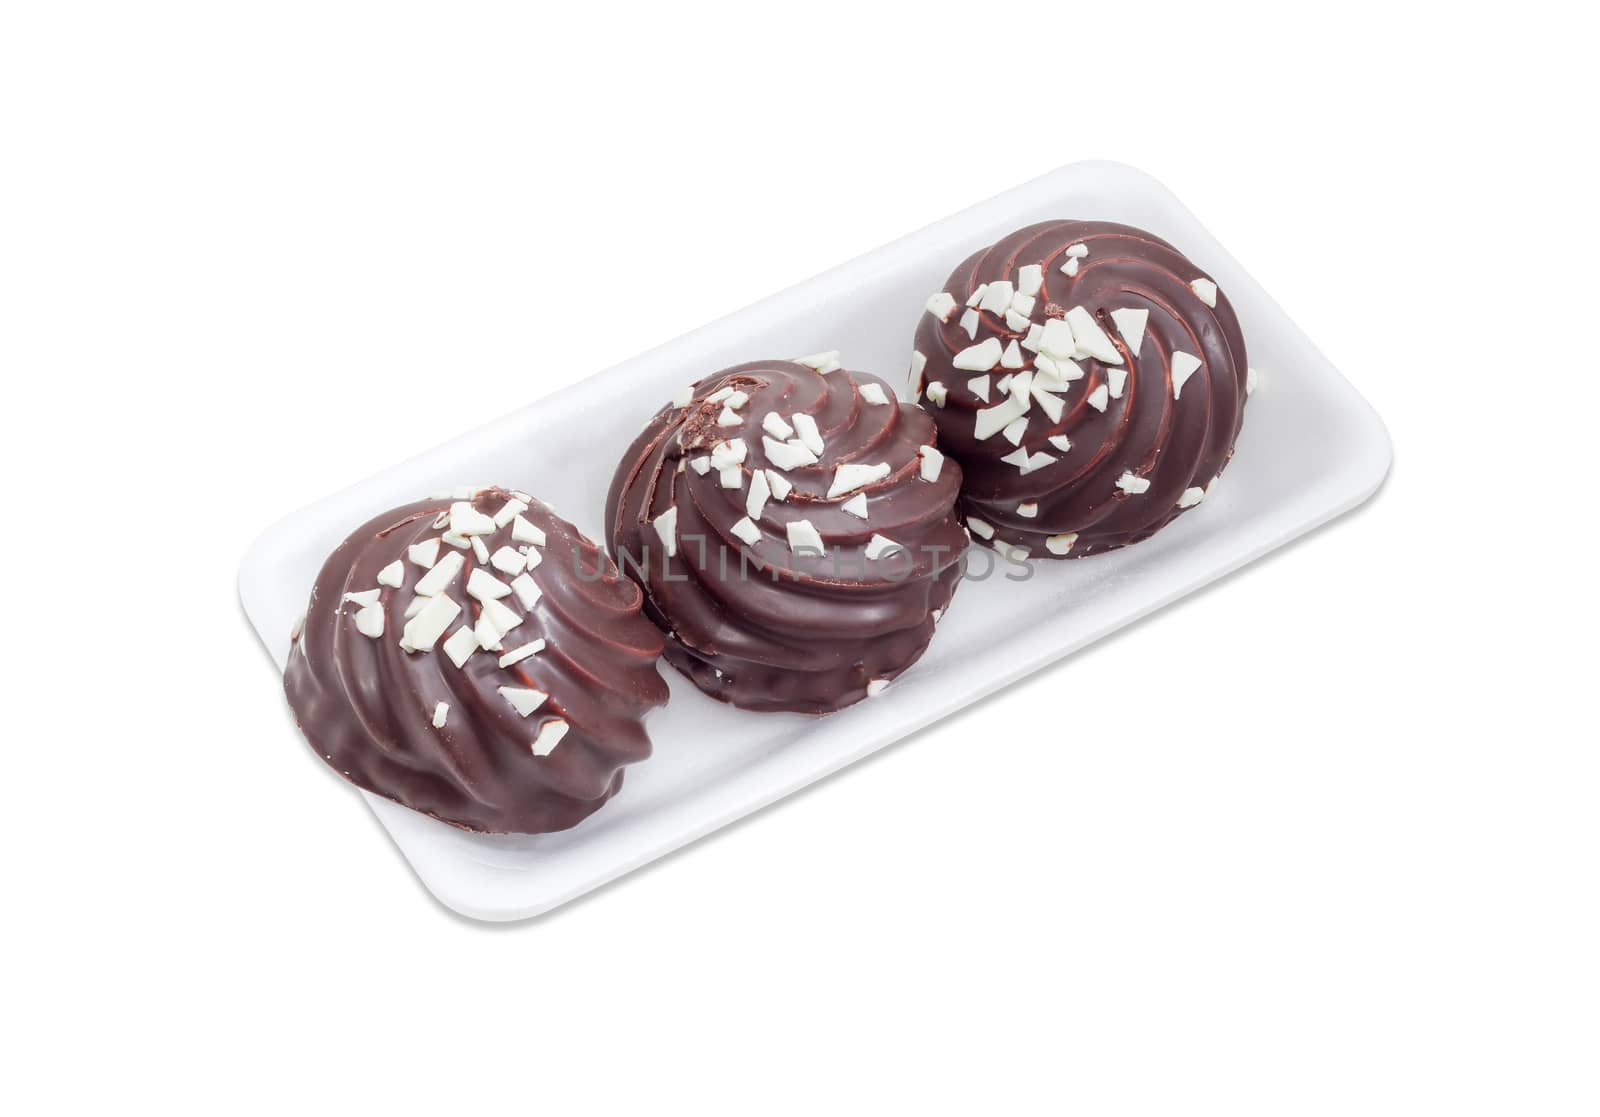 Three cookies with whipped egg whites, glazed with dark chocolate and sprinkled with chunks of white chocolate on the small plastic tray on a light background
